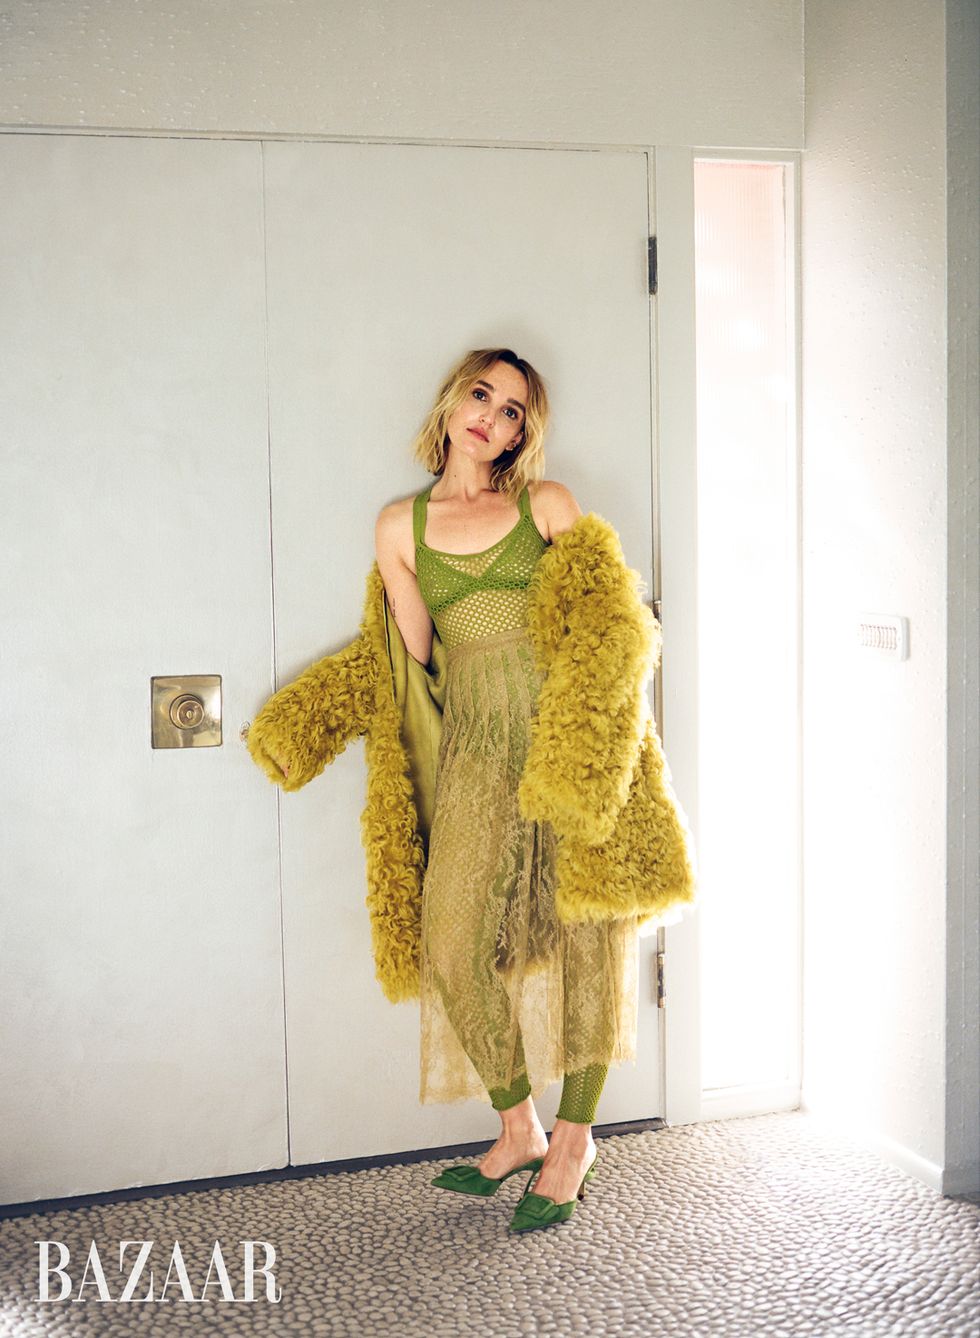 chloe fineman leans against a white door wearing a green knit bodysuit, sheer lace skirt, green mules, and a yellow shag jacket